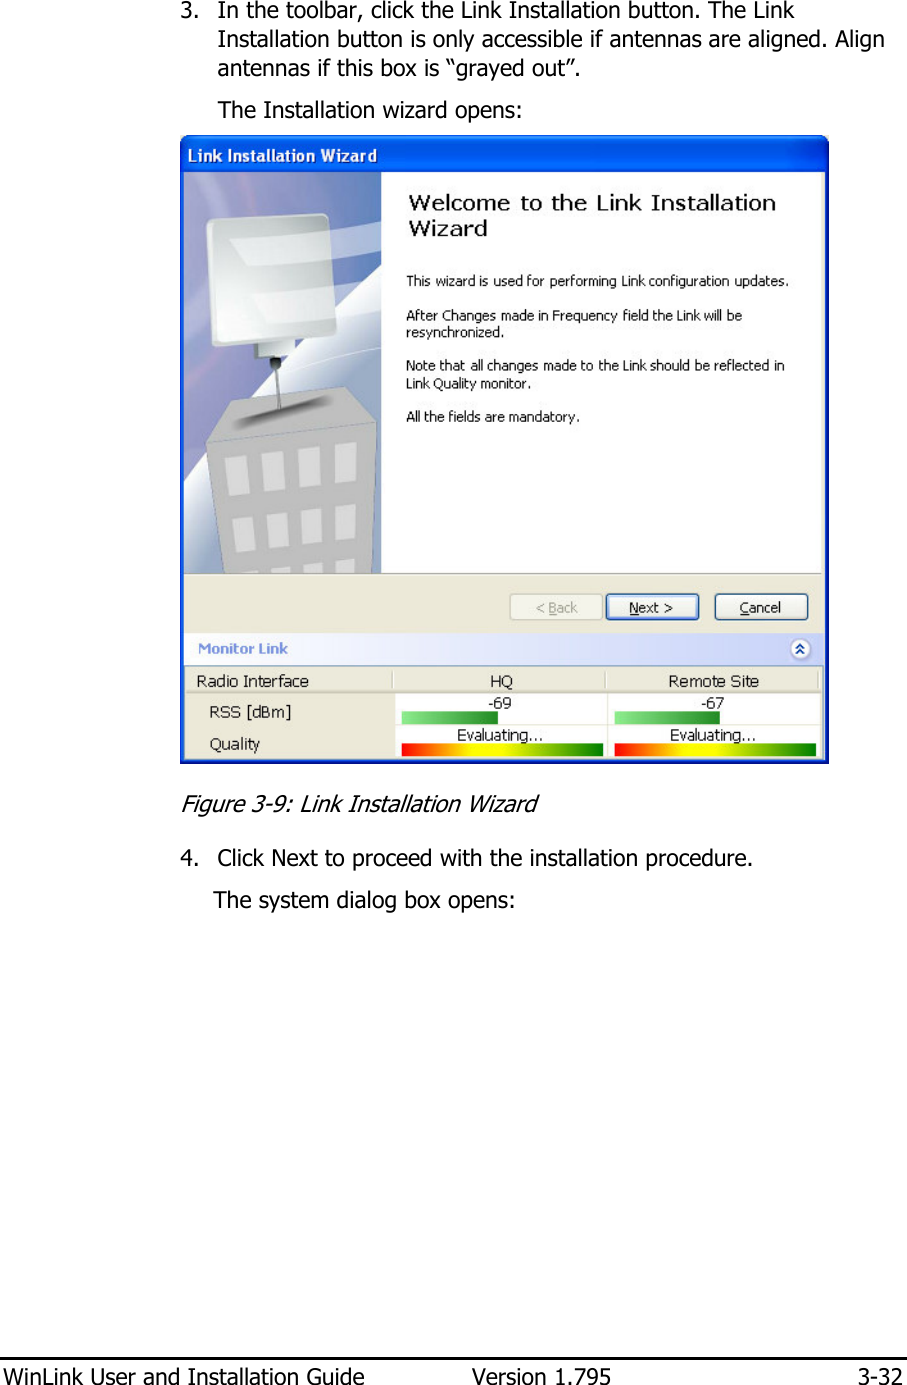  WinLink User and Installation Guide  Version 1.795  3-32  3. In the toolbar, click the Link Installation button. The Link Installation button is only accessible if antennas are aligned. Align antennas if this box is “grayed out”. The Installation wizard opens:  Figure  3-9: Link Installation Wizard 4. Click Next to proceed with the installation procedure. The system dialog box opens: 